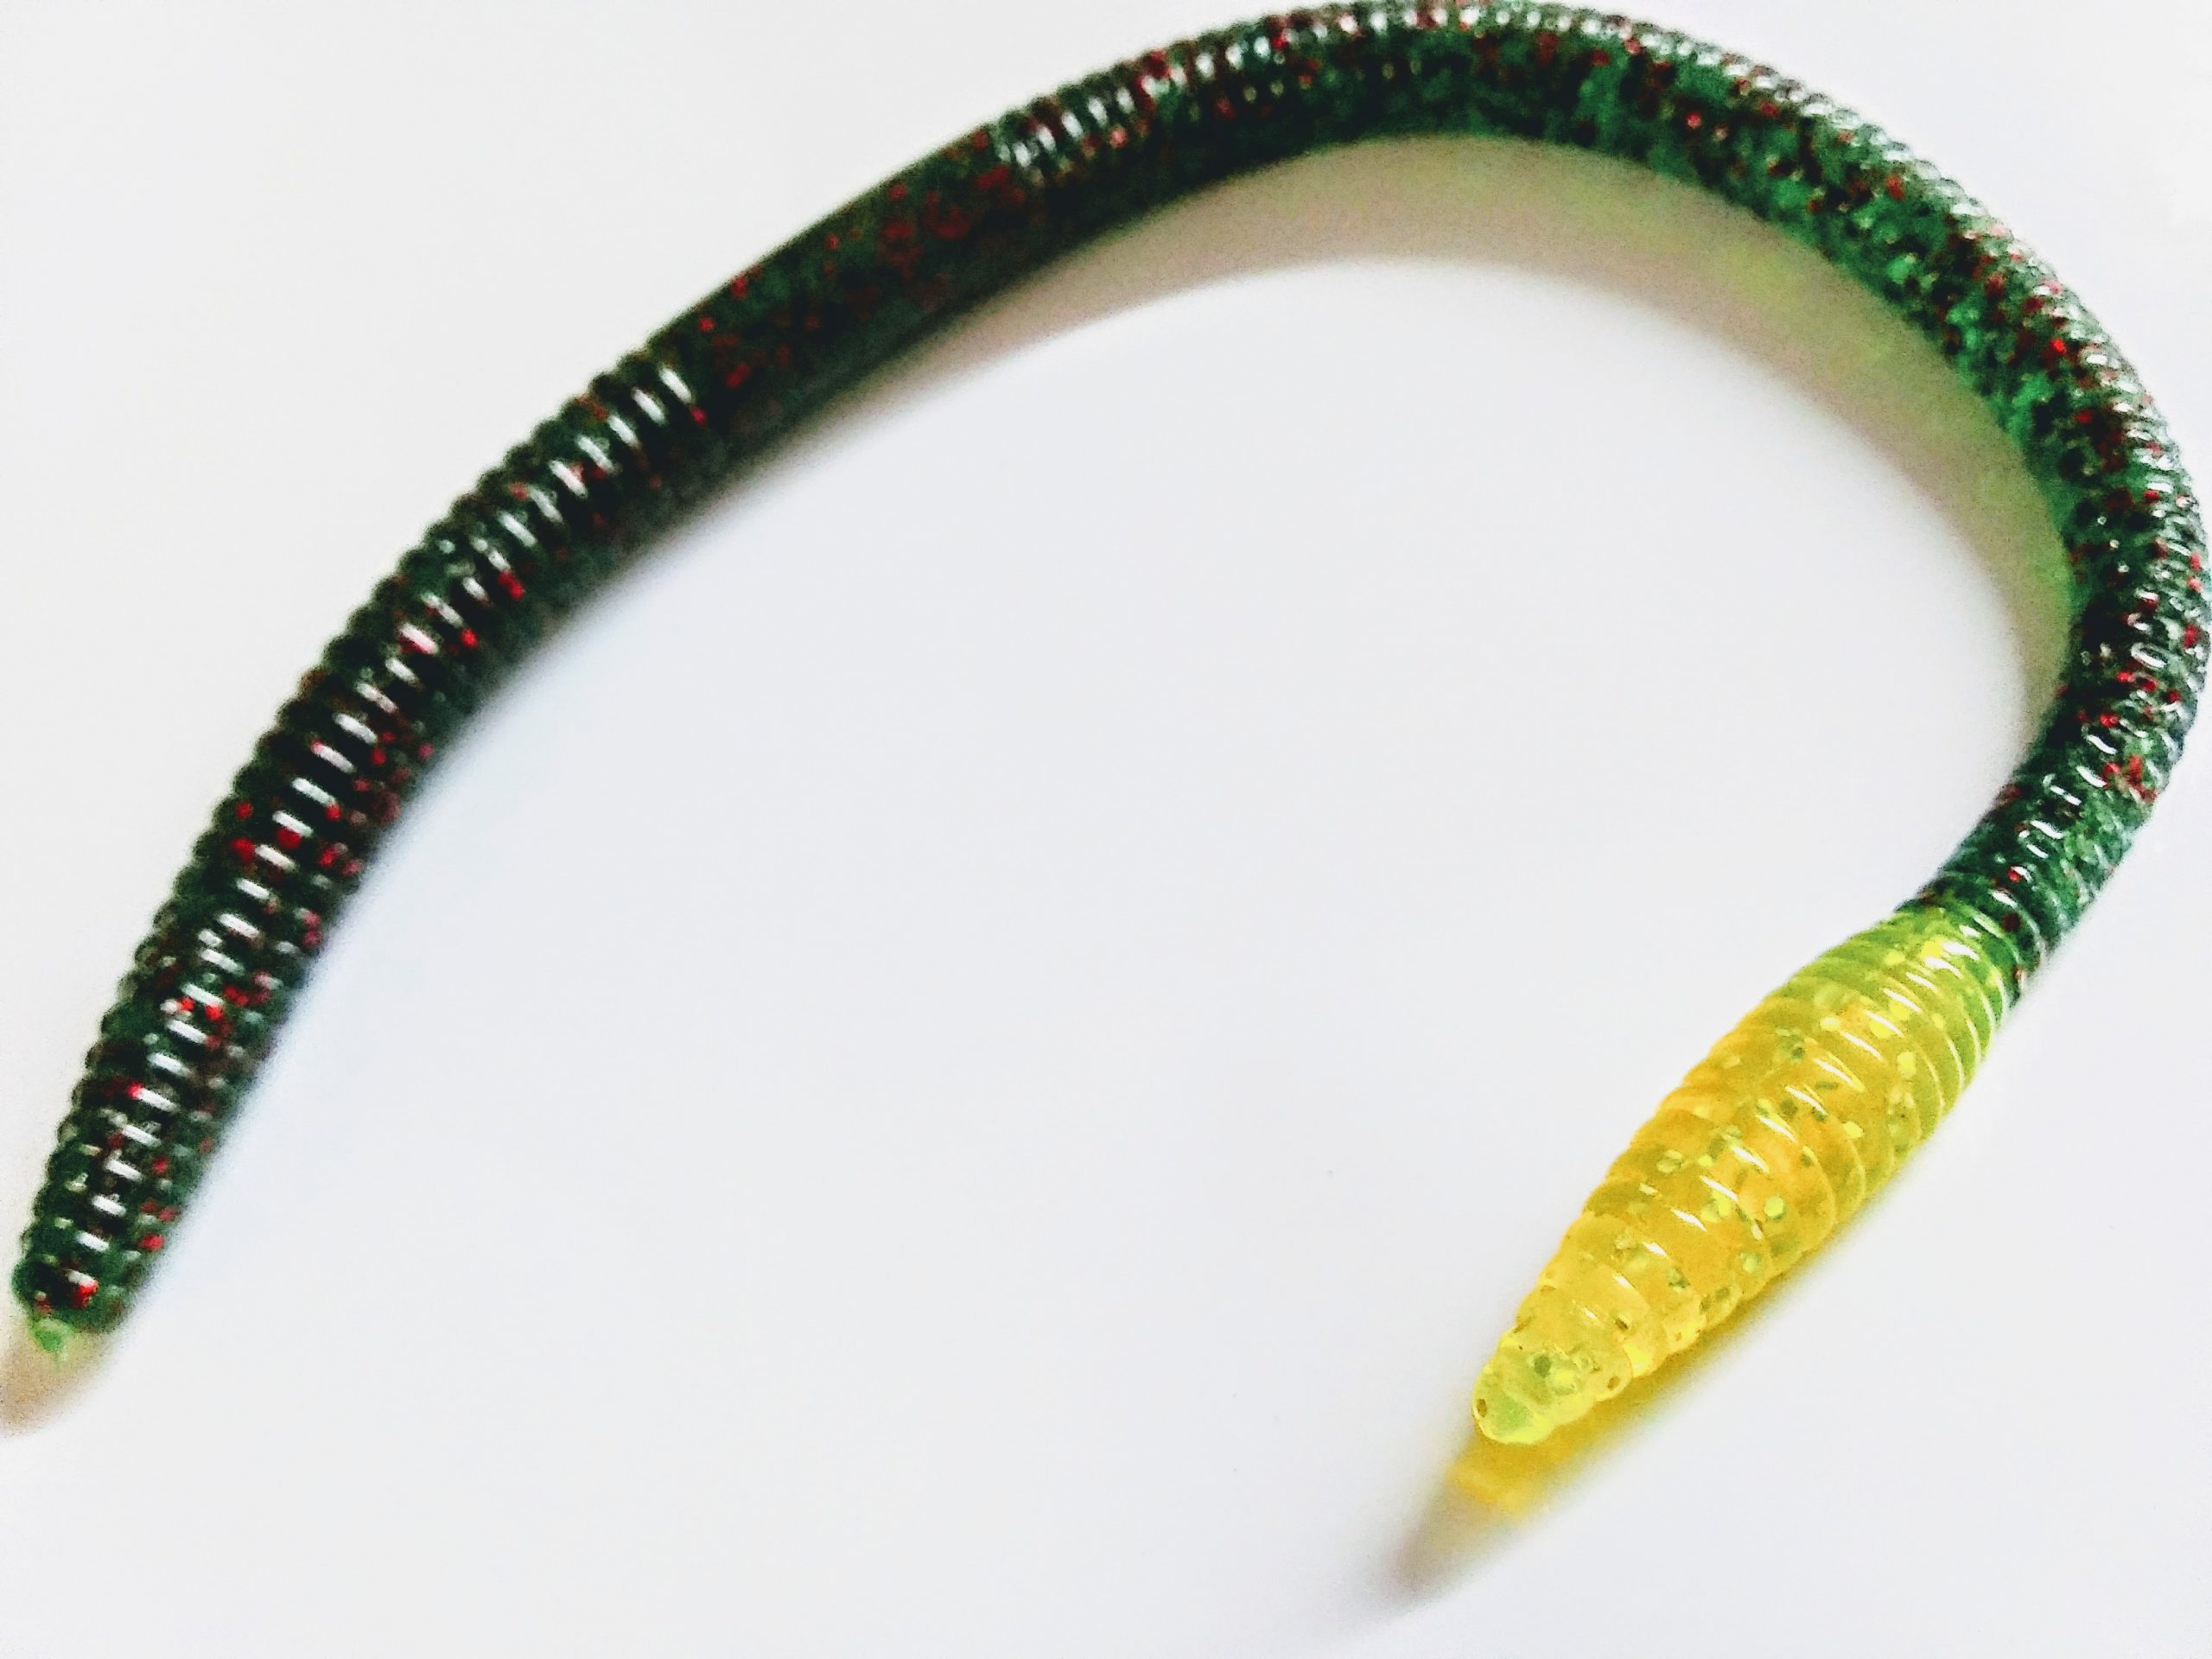 10 Inch worm soft plastic. Main body watermelon red Chartreuse tip. We call  this 10 inch slab - Get Hooked Magic Baits